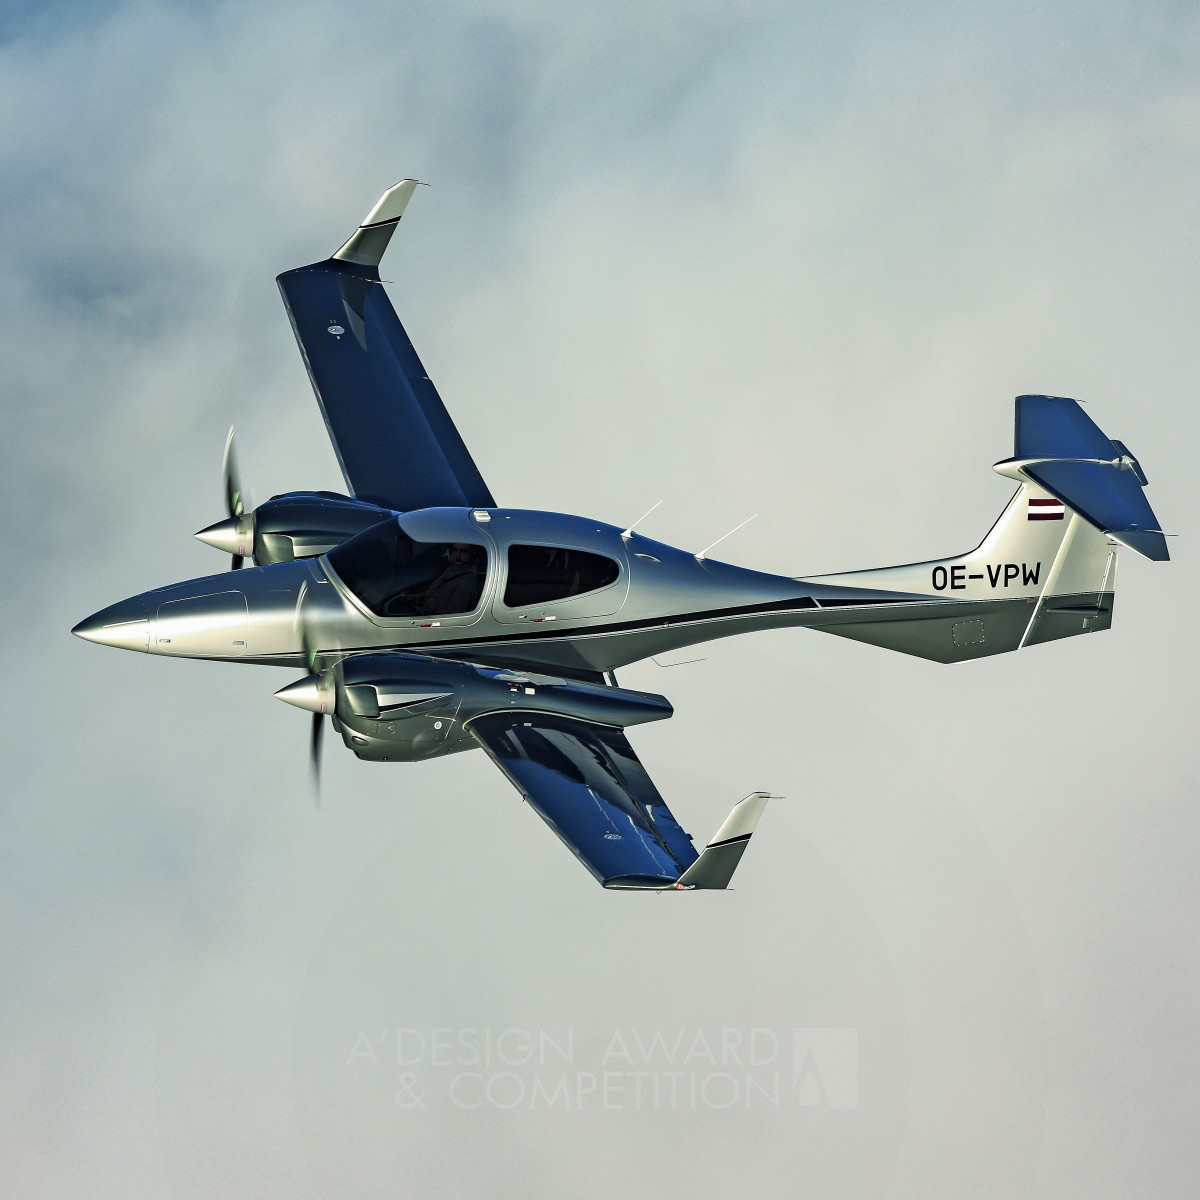 DA42-VI Twin Engine Piston Aircraft Private and Training Aircraft by Diamond Aircraft Industries GmbH